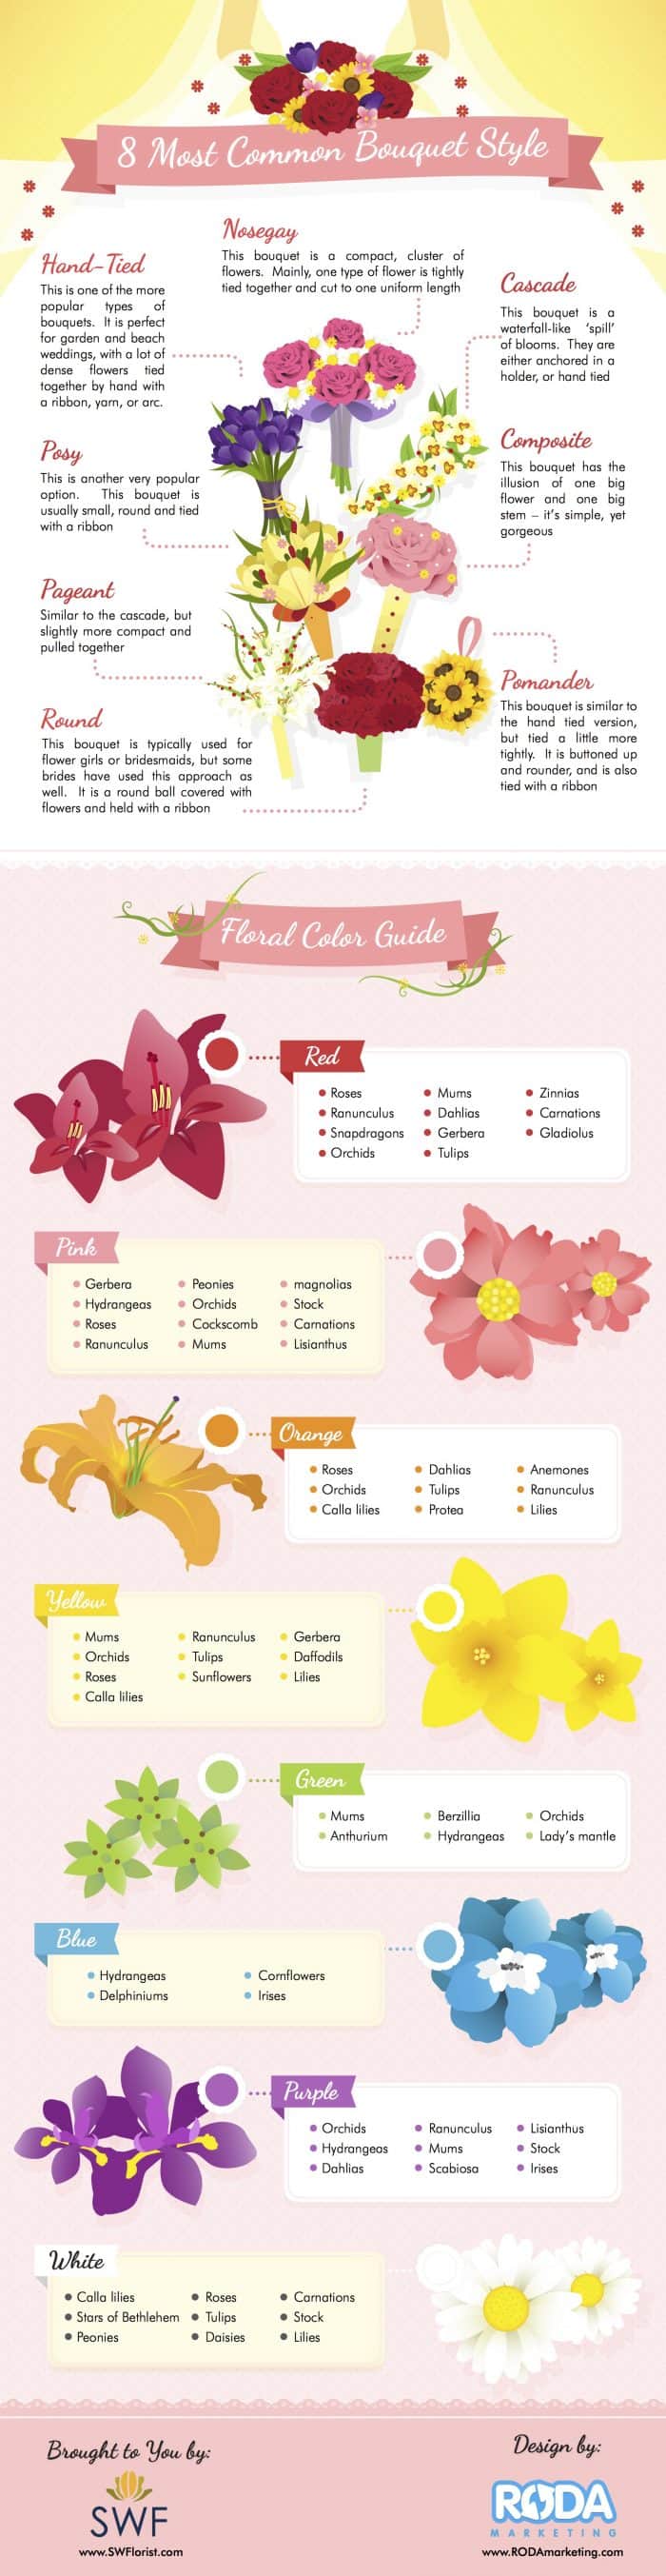 popular bouquet styles and what they can be used for